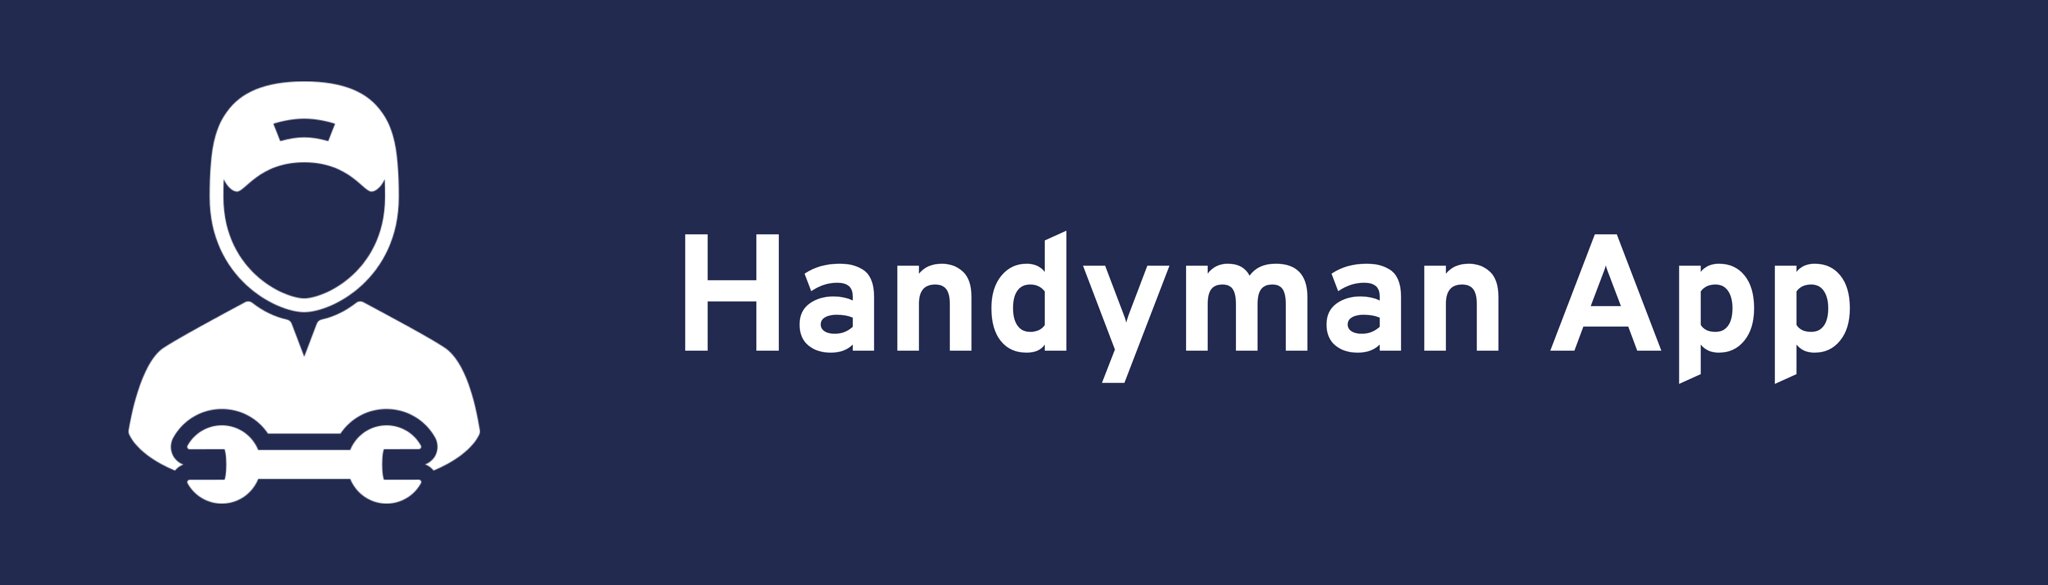 Handy Service - On-Demand Home Services, Business Listing, Handyman Booking Android App with Admin - 24